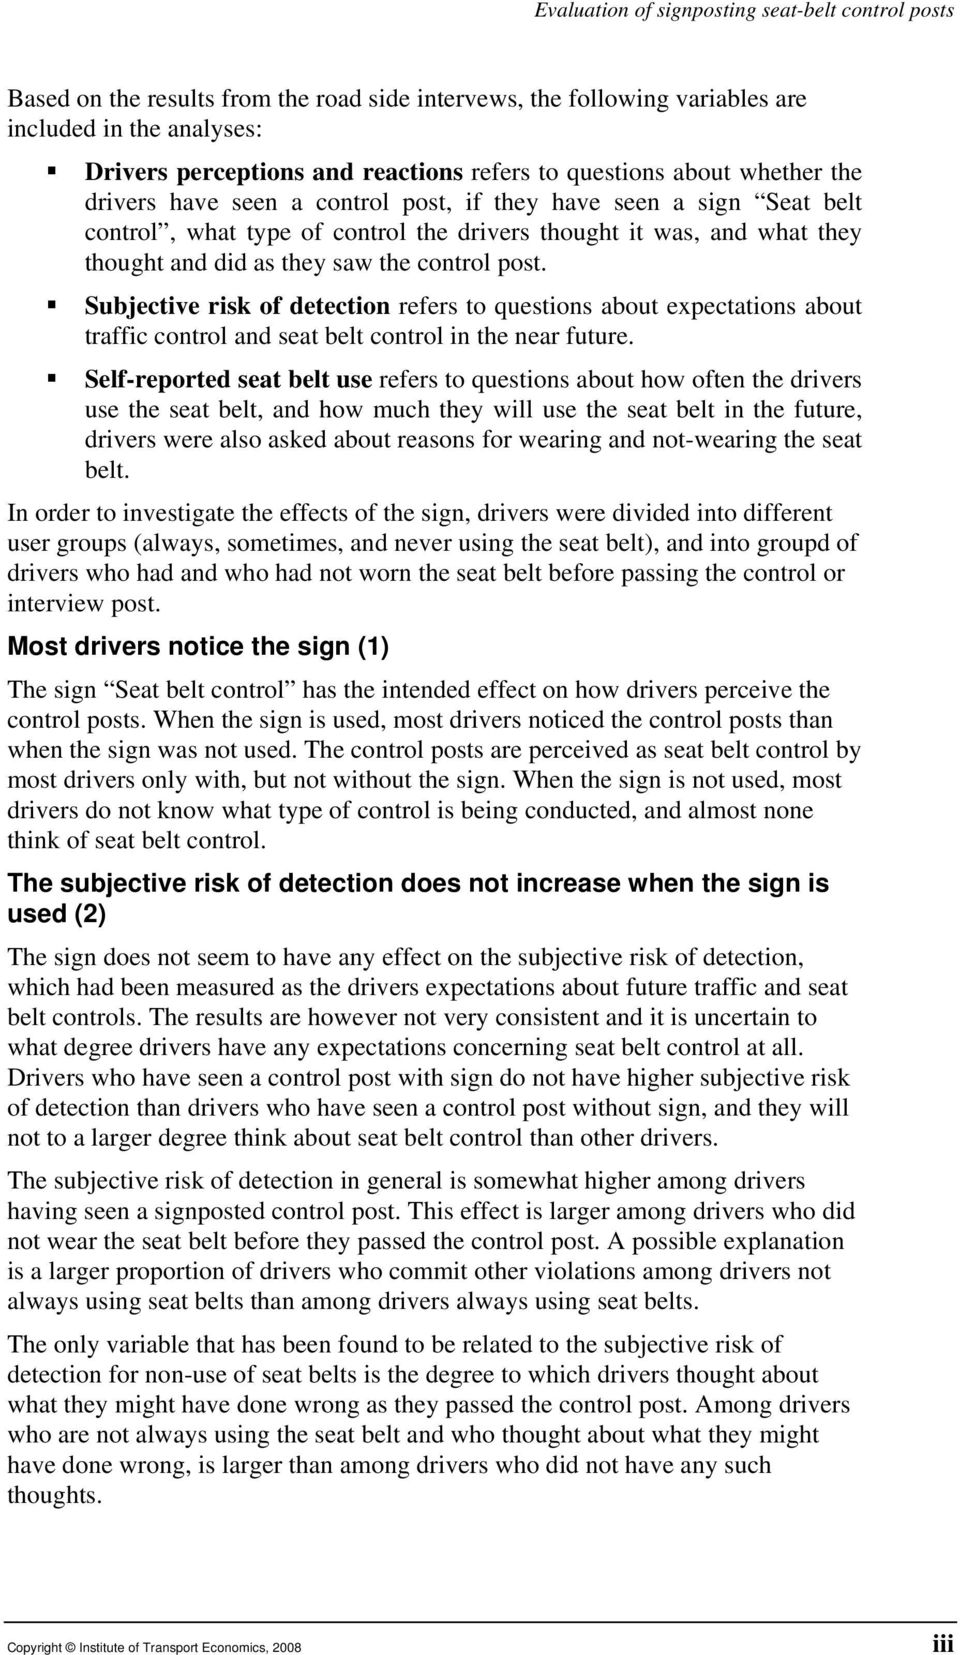 the control post. Subjective risk of detection refers to questions about expectations about traffic control and seat belt control in the near future.